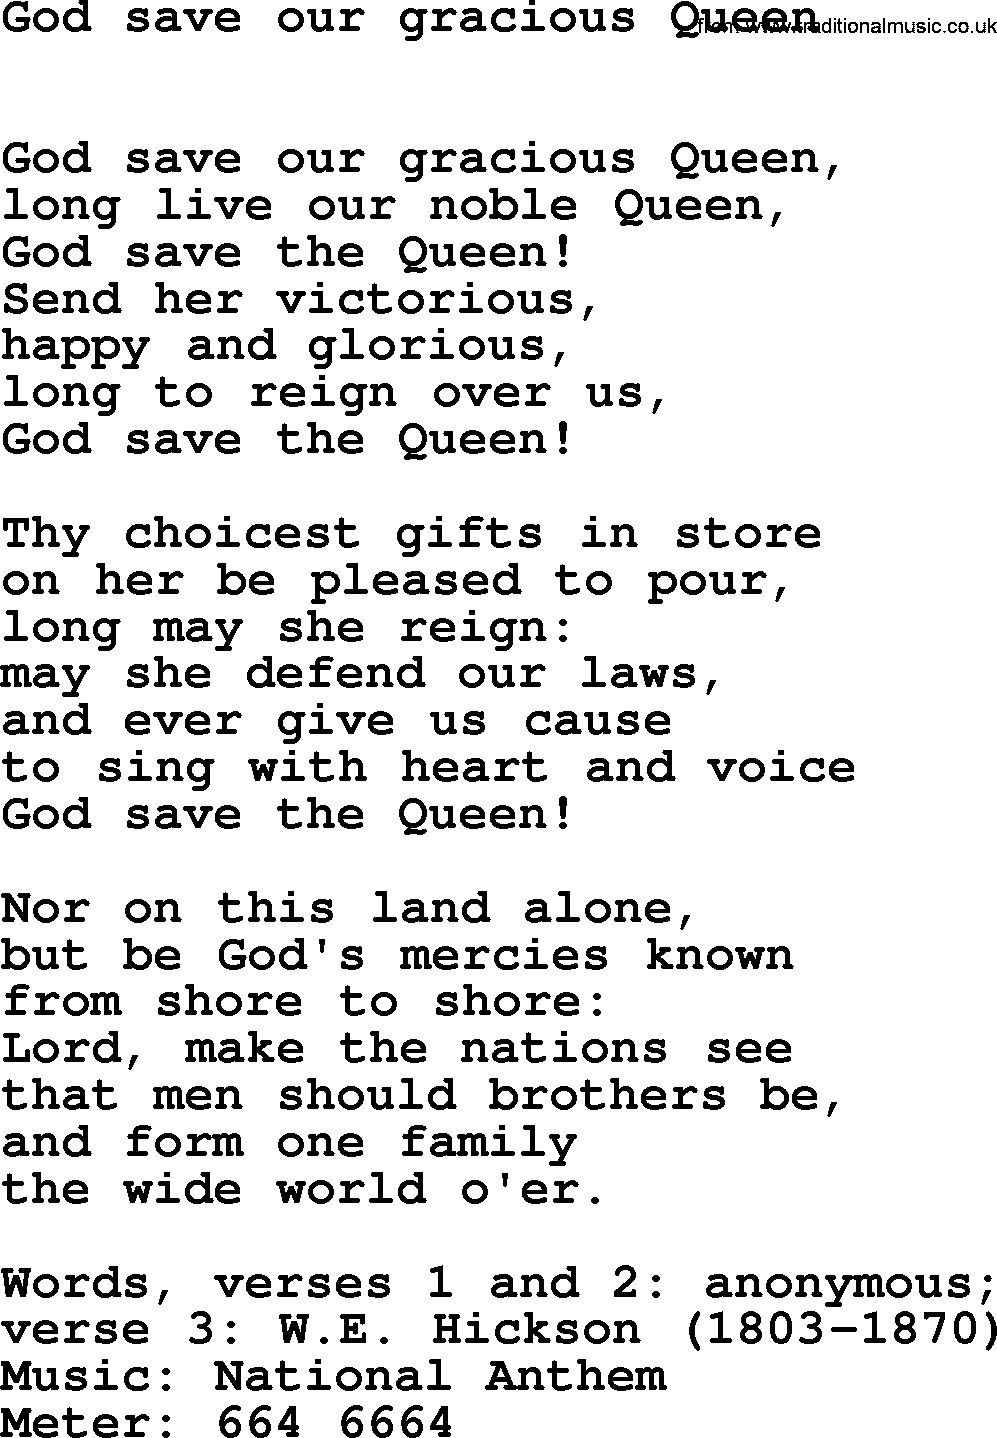 Book of Common Praise Hymn: God Save Our Gracious Queen.txt lyrics with midi music